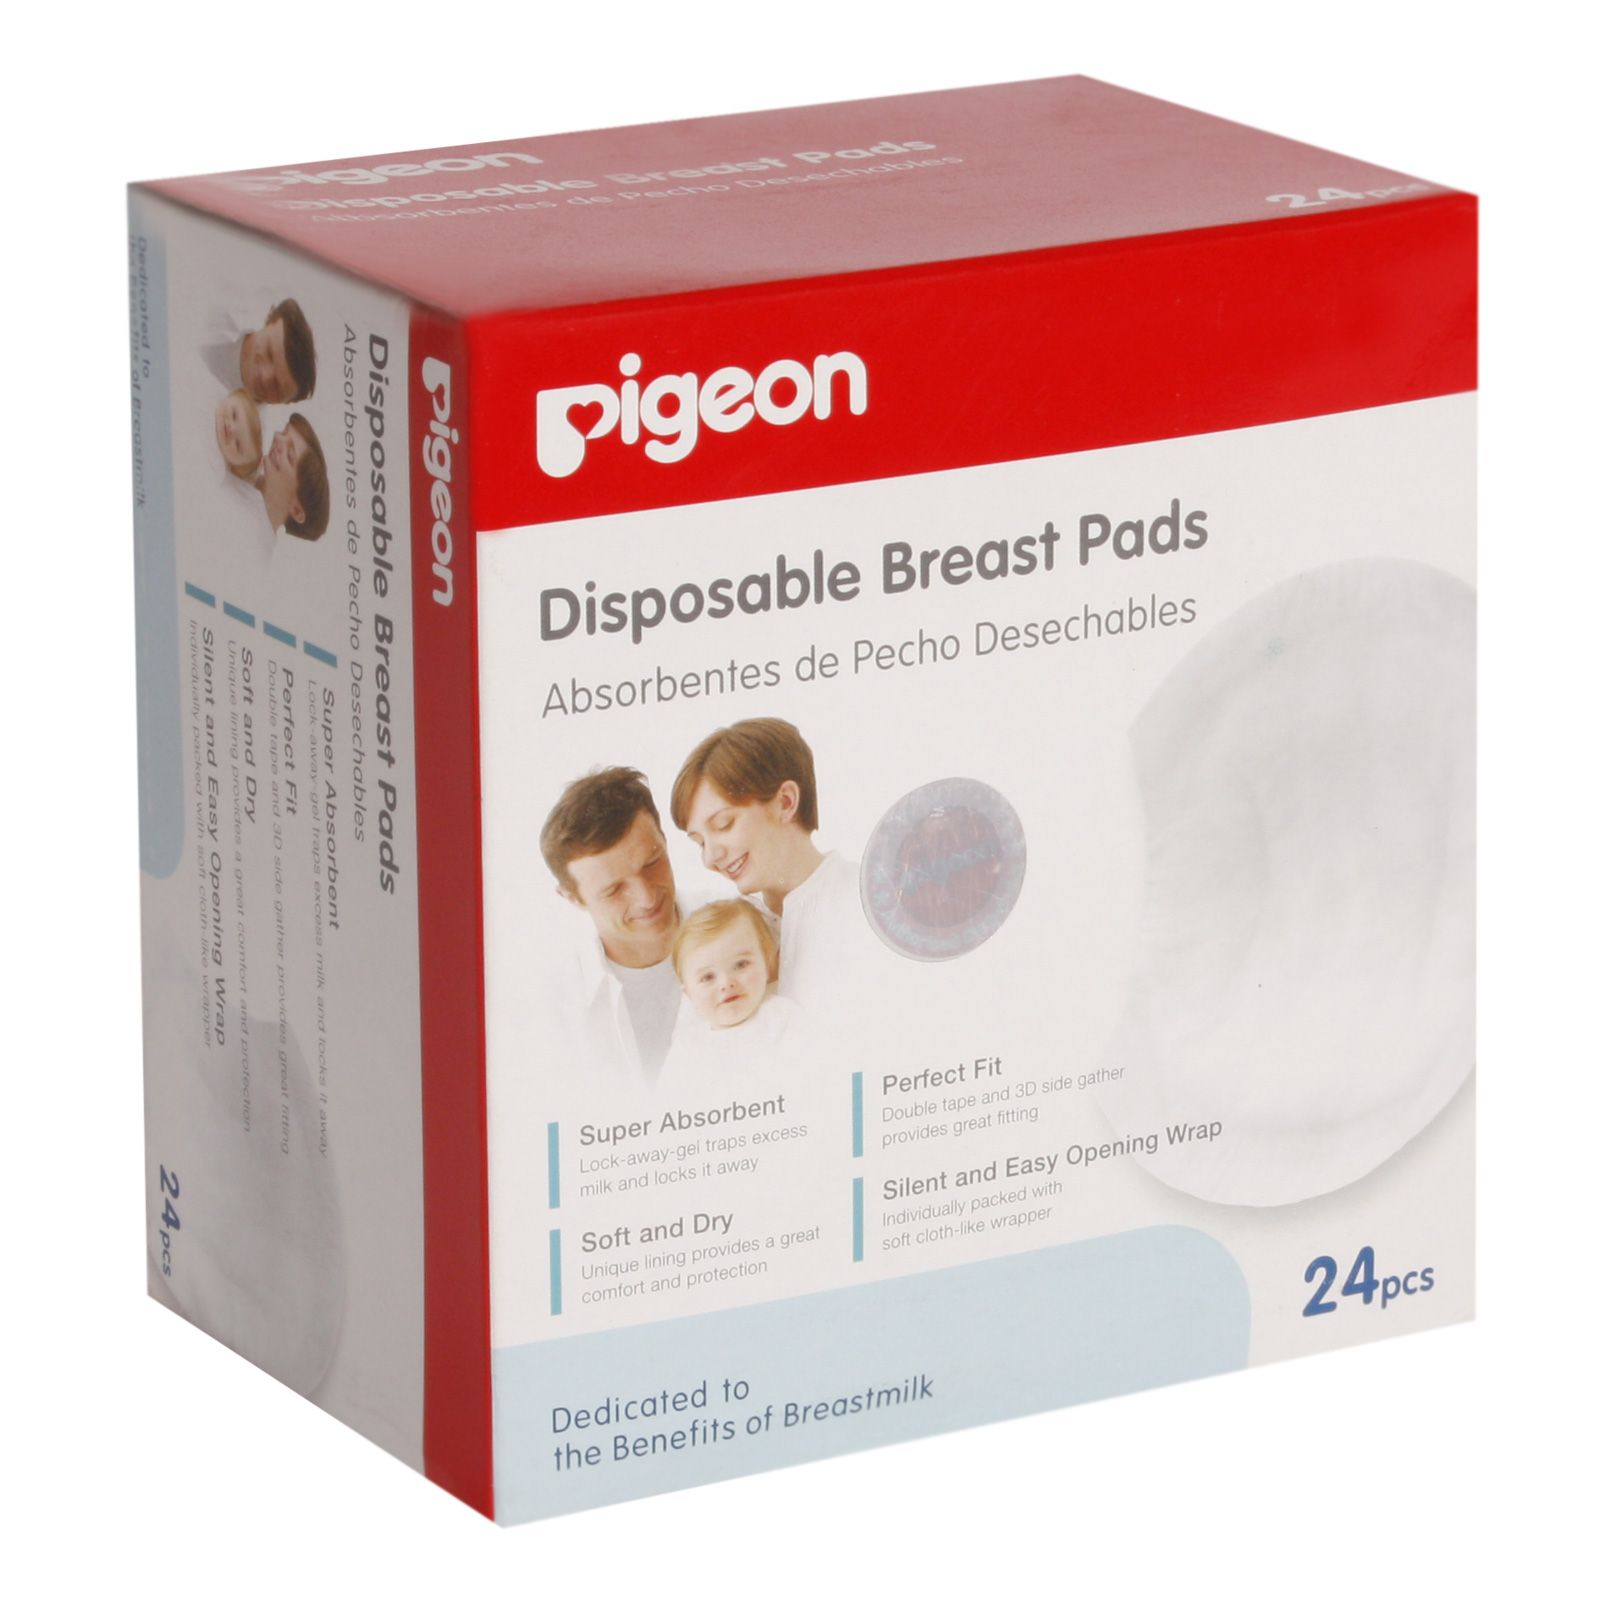 Pigeon - Disposable Breast Pads